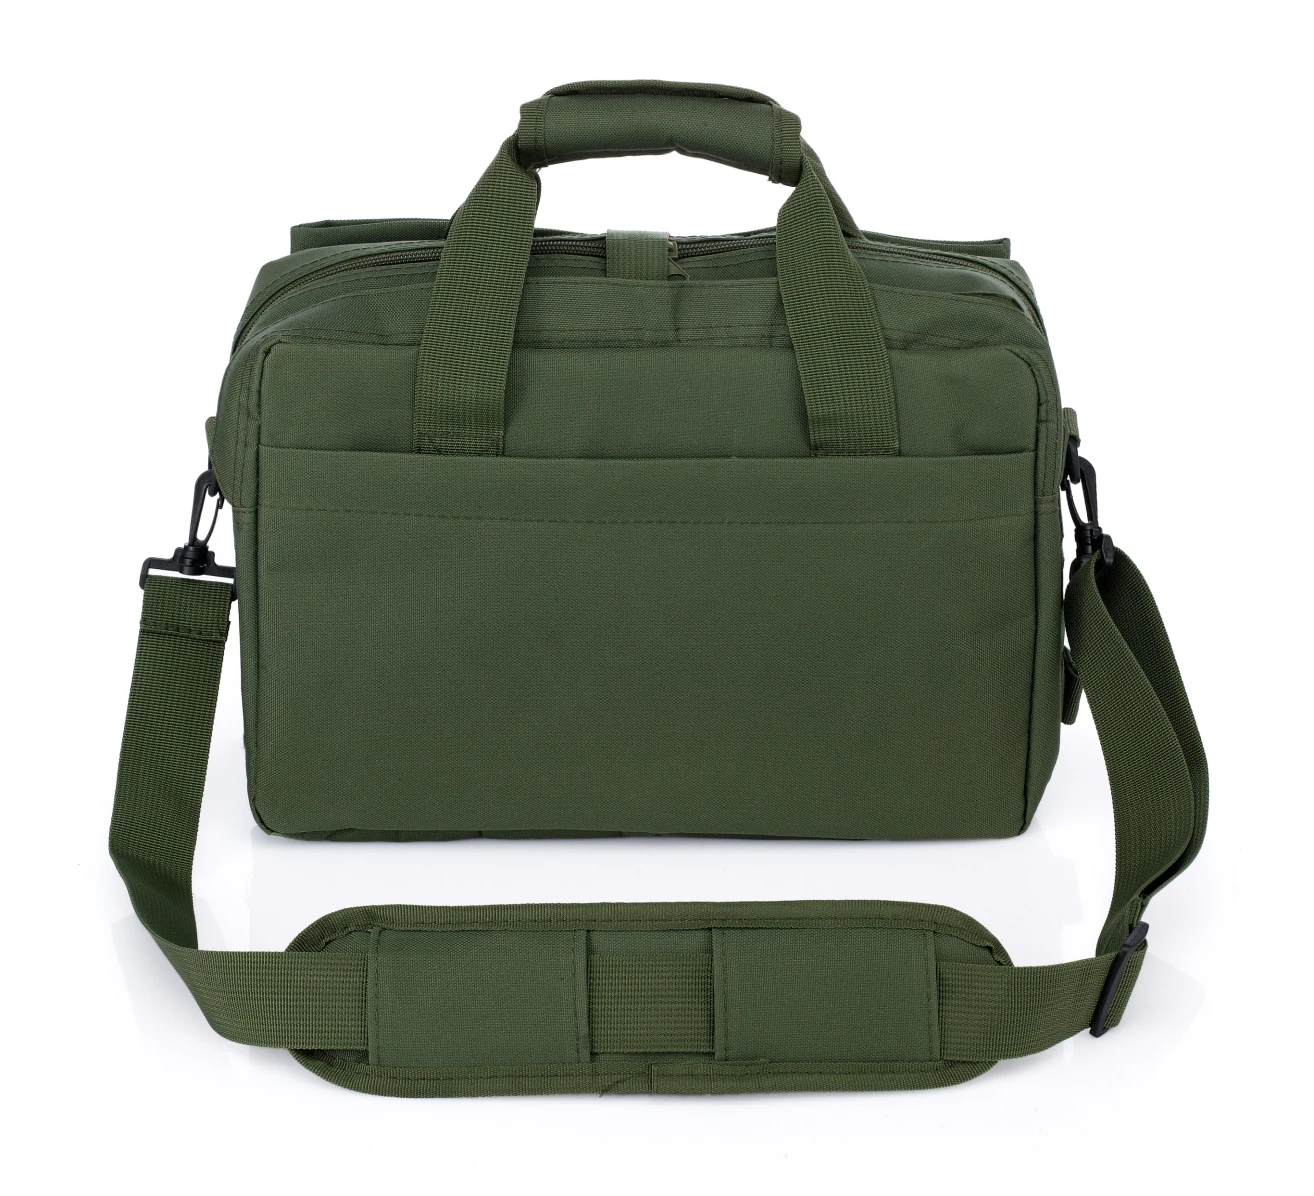 Water Resistant Tactical Style Laptop Shoulder Bag Messenger Bag With Compass